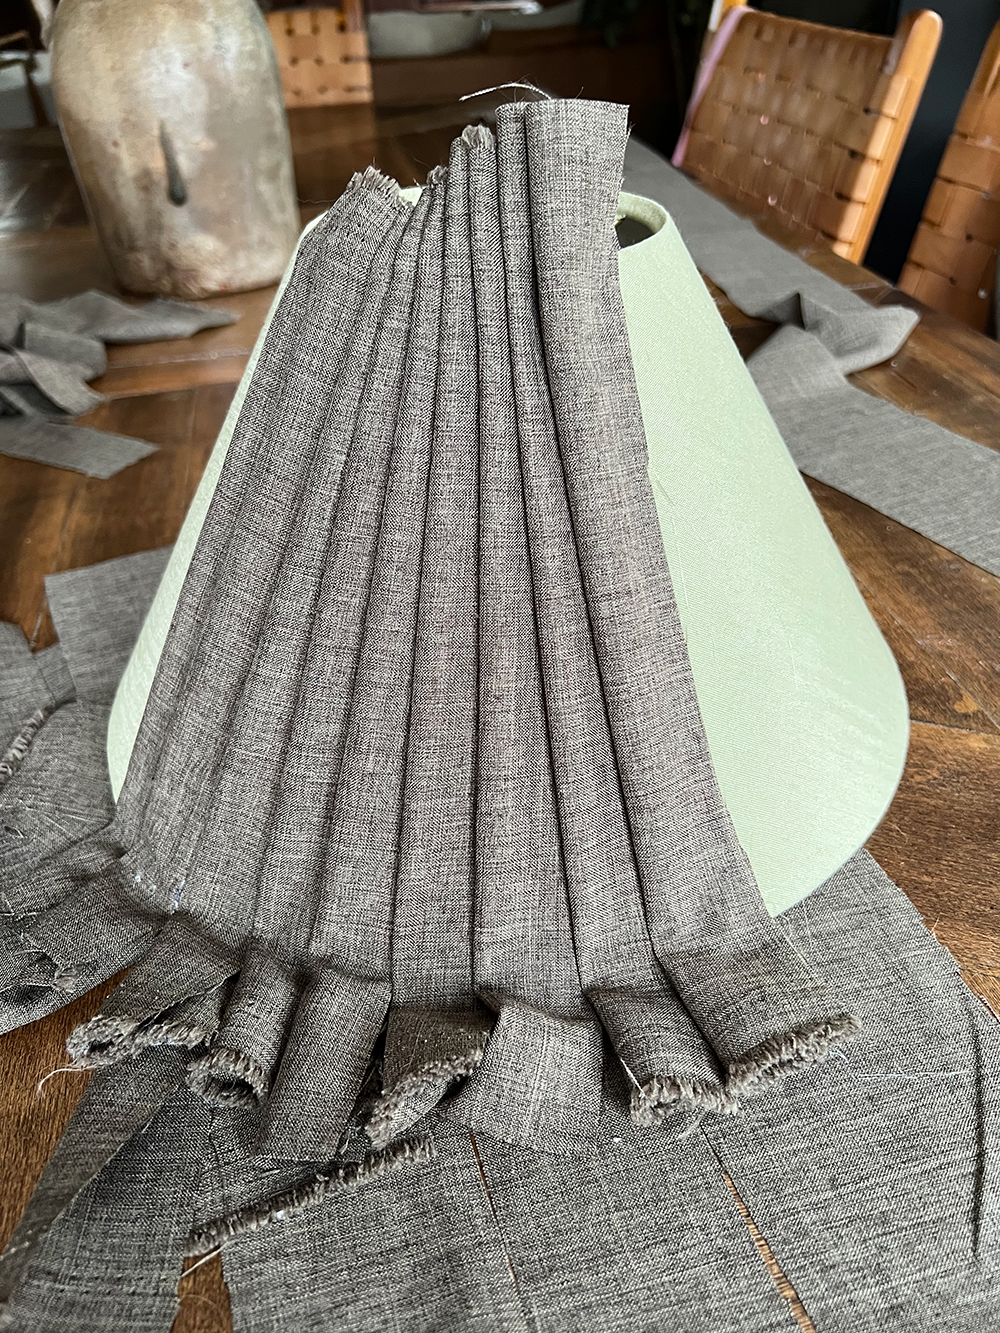 Making Your Own Pleated Lamp Shade